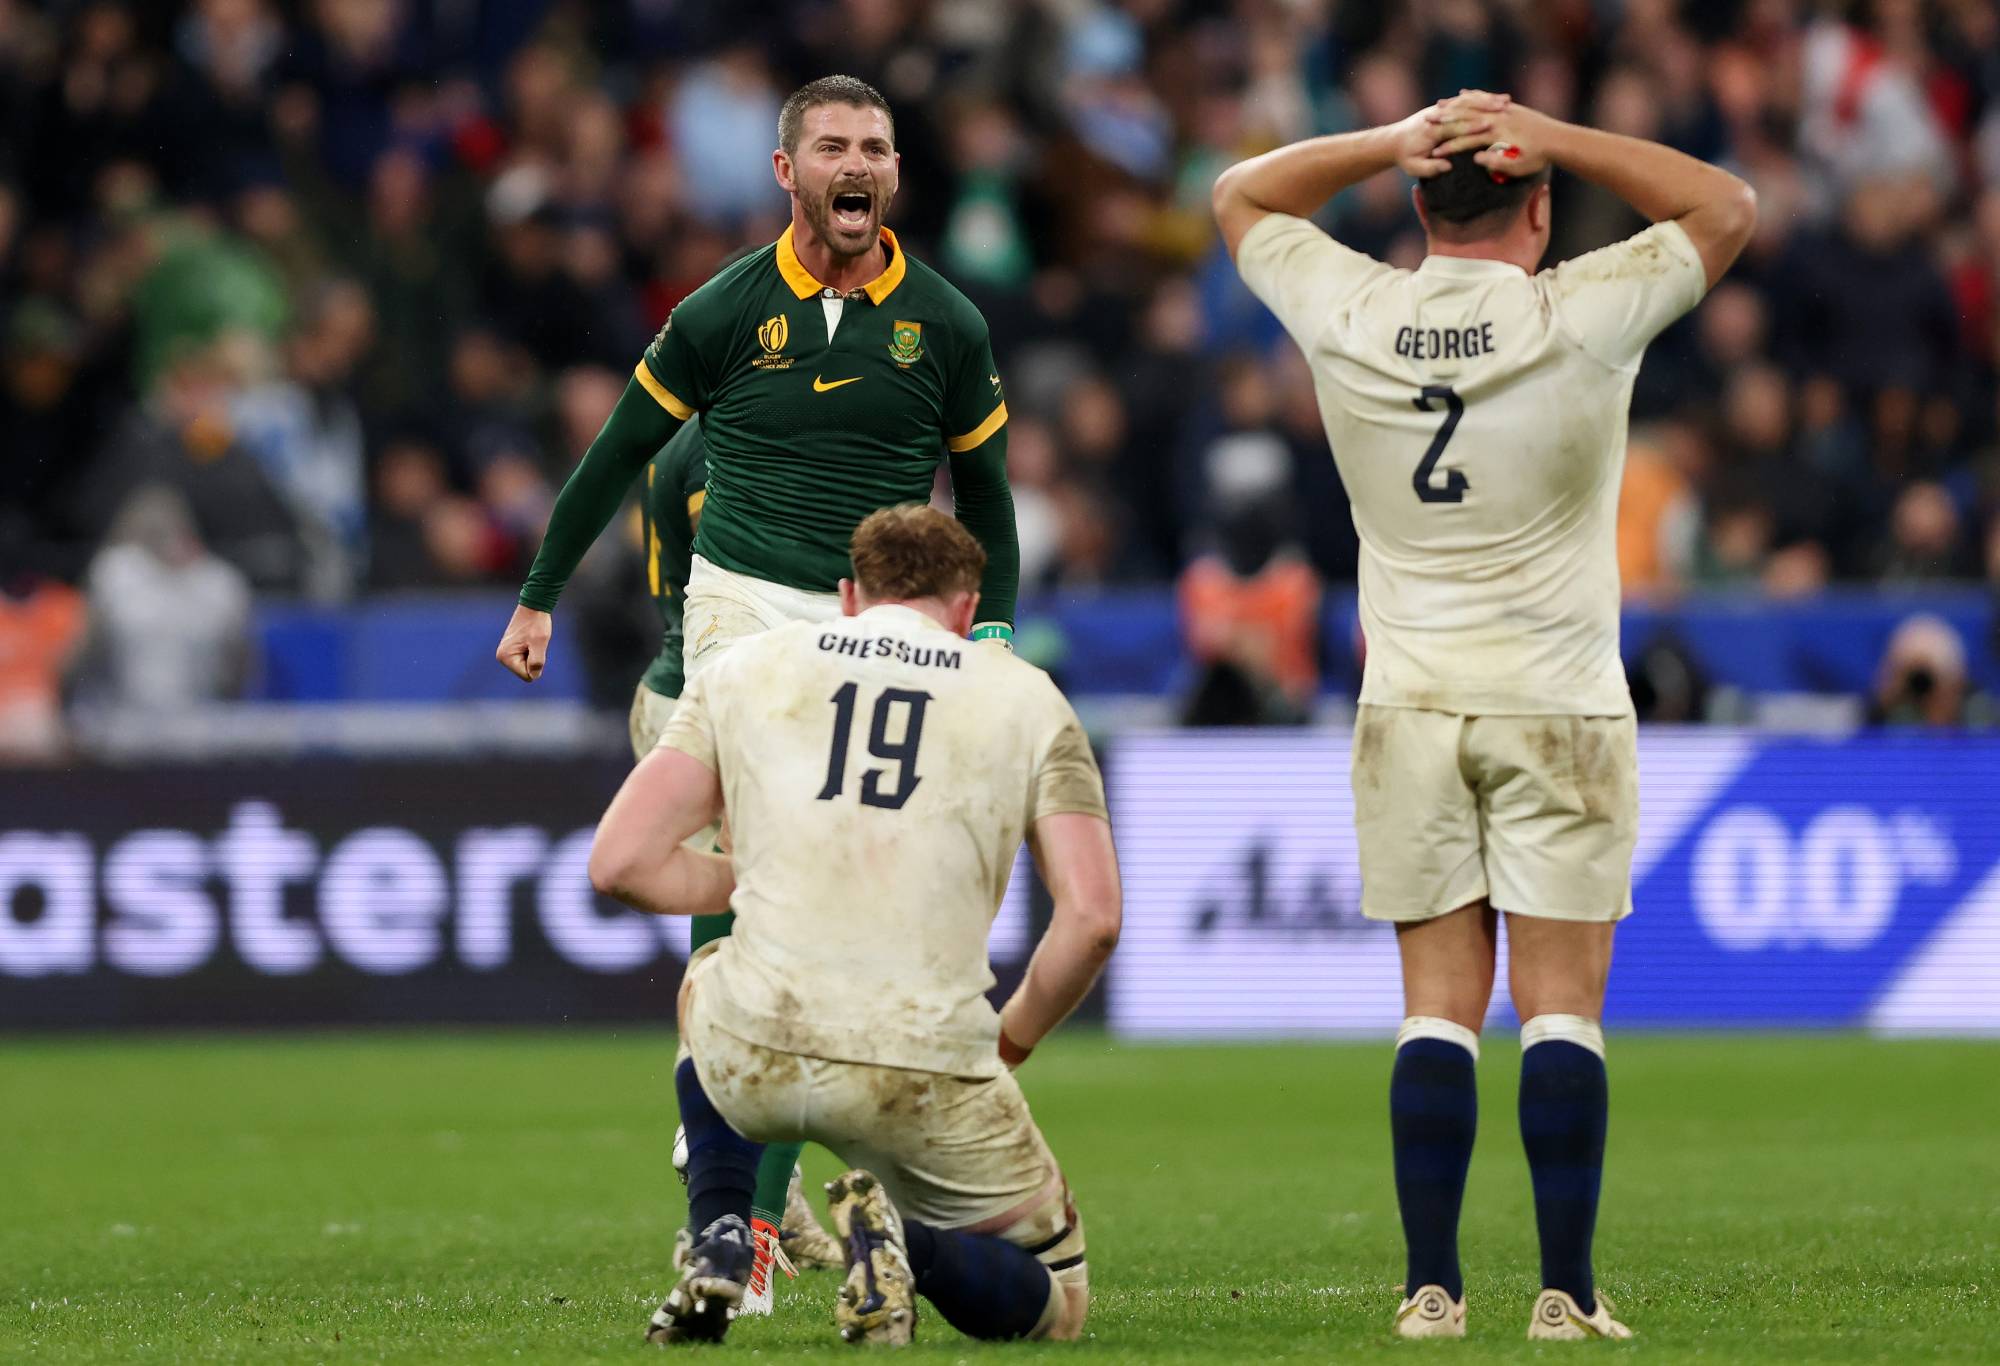 Willie Le Roux of South Africa celebrates at the final whistle during the Rugby World Cup France 2023 match between England and South Africa at Stade de France on October 21, 2023 in Paris, France. (Photo by Paul Harding/Getty Images)